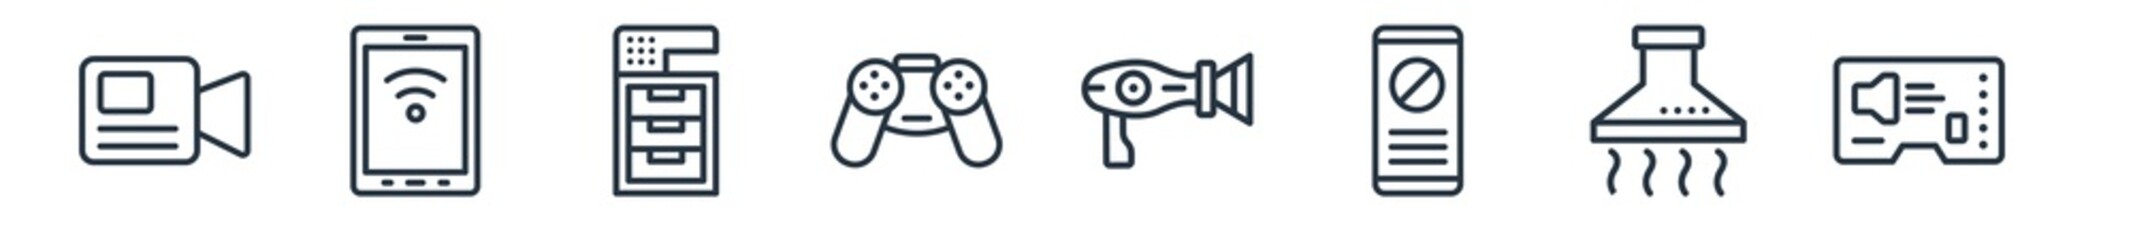 linear set of electronic devices outline icons. line vector icons such as video recorder, devices, copy machine, joystick, blow dryer, sound card vector illustration.